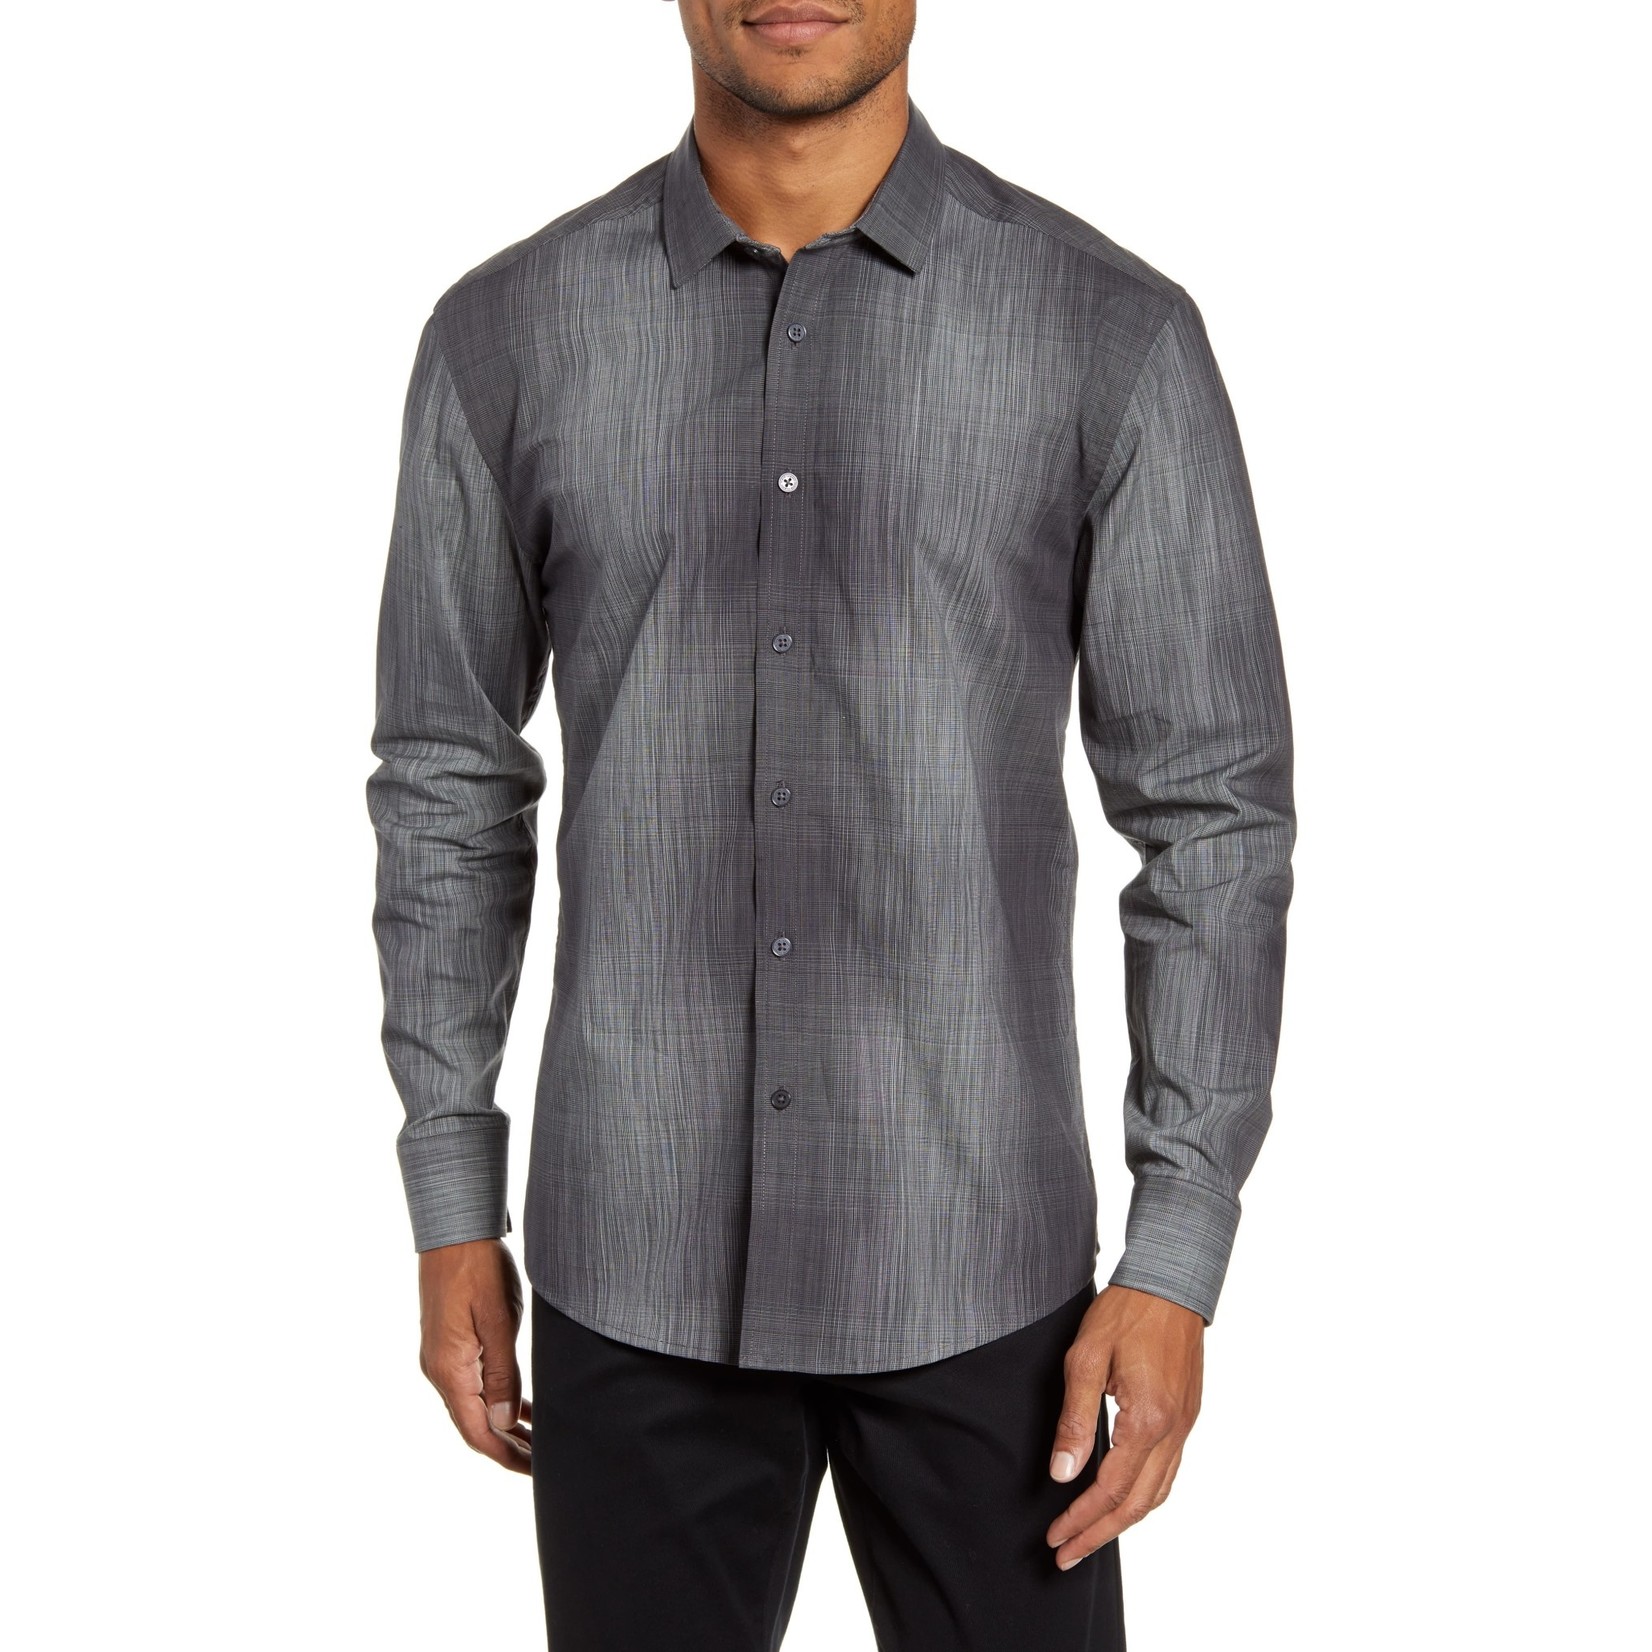 Vince Camuto Men's Vince Camuto Slim Fit Abstract Check Button-up Shirt, Size Small - Grey